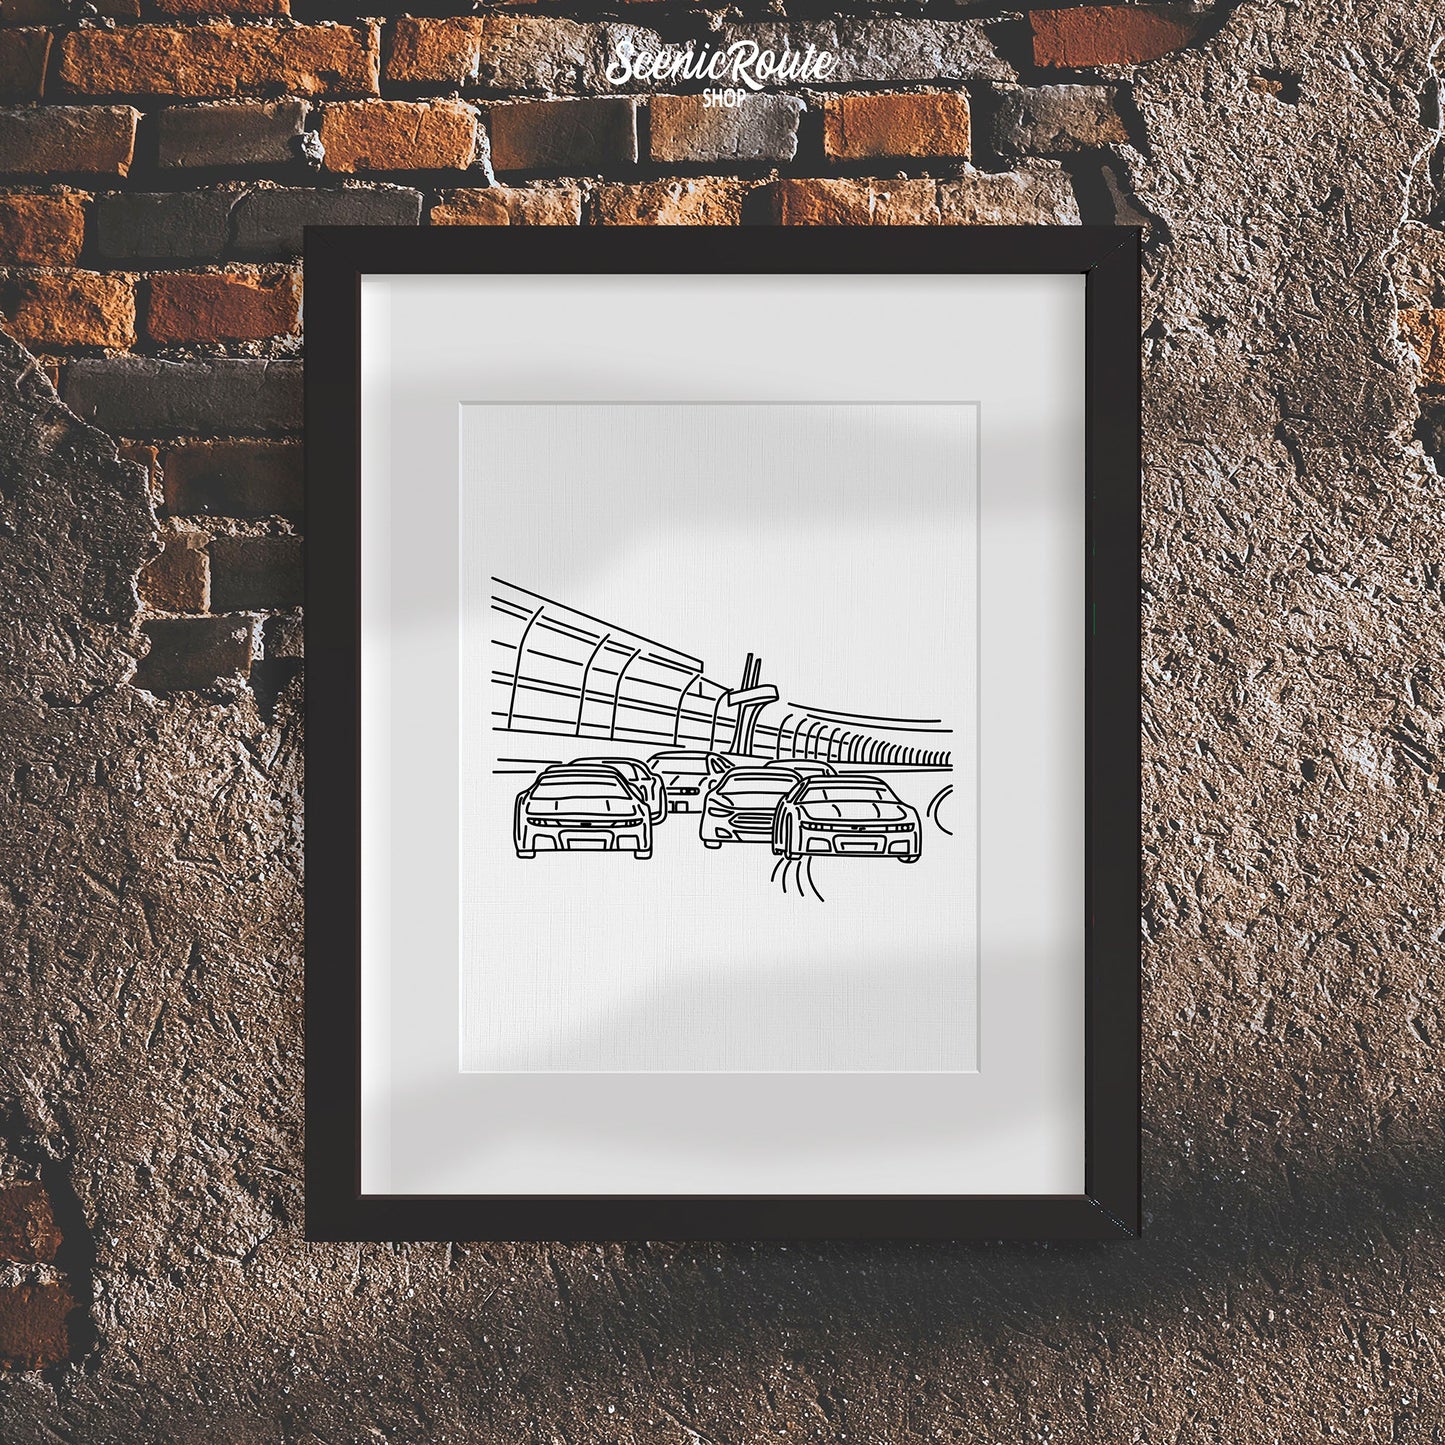 A framed line art drawing of Nascar on a rough brick wall